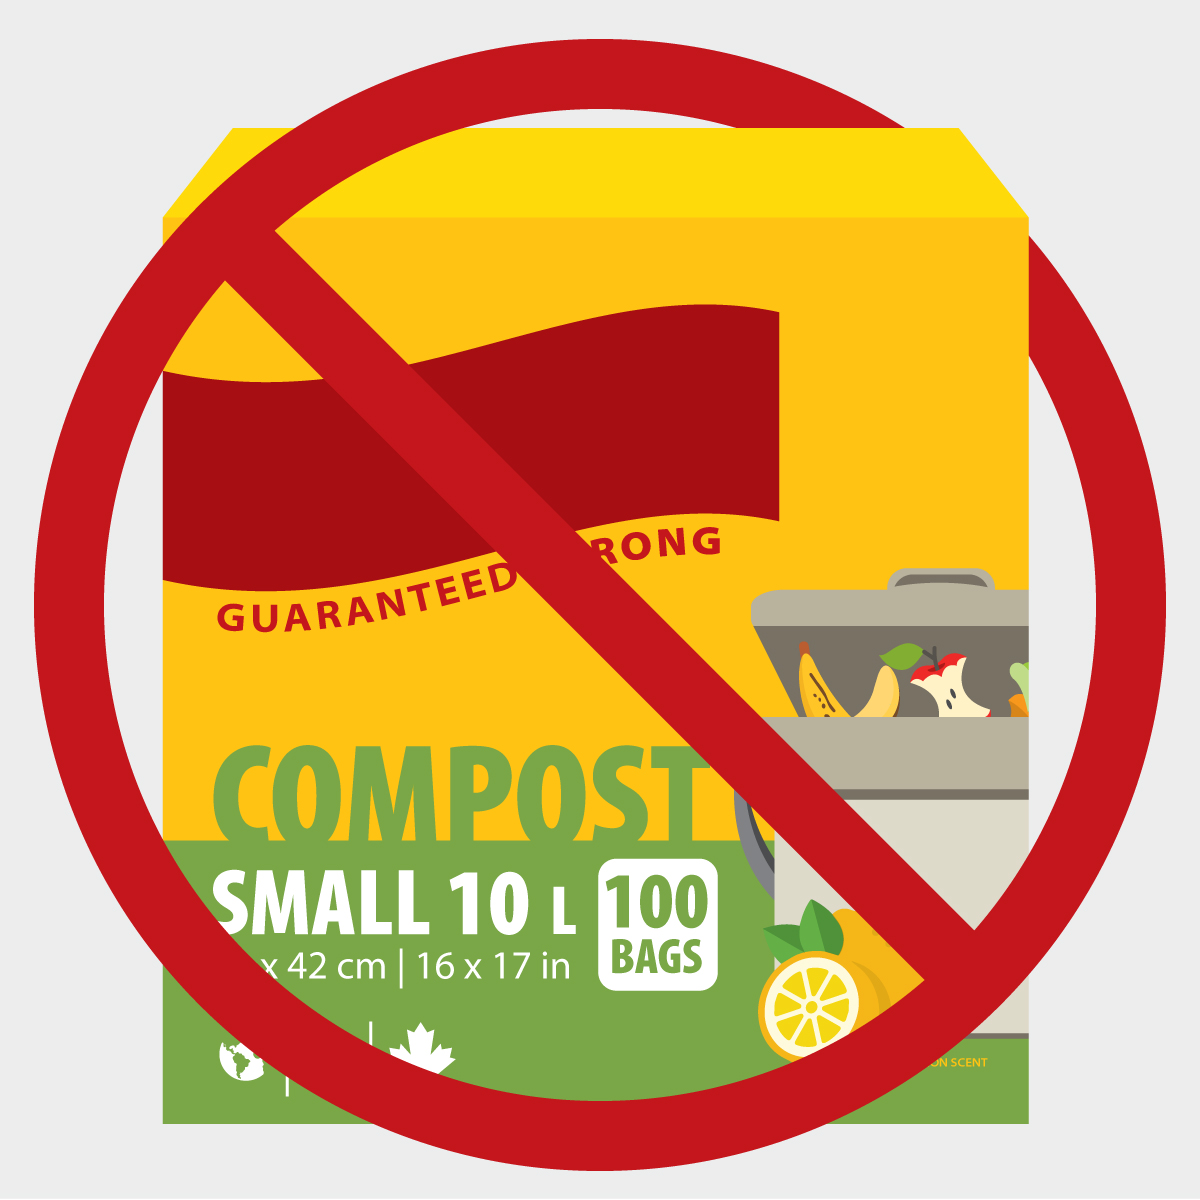 City of Kamloops on X: 📢We want to share a friendly reminder that  compostable plastic bags are NOT accepted in curbside organics collection.  While these bags are labelled as compostable, they only